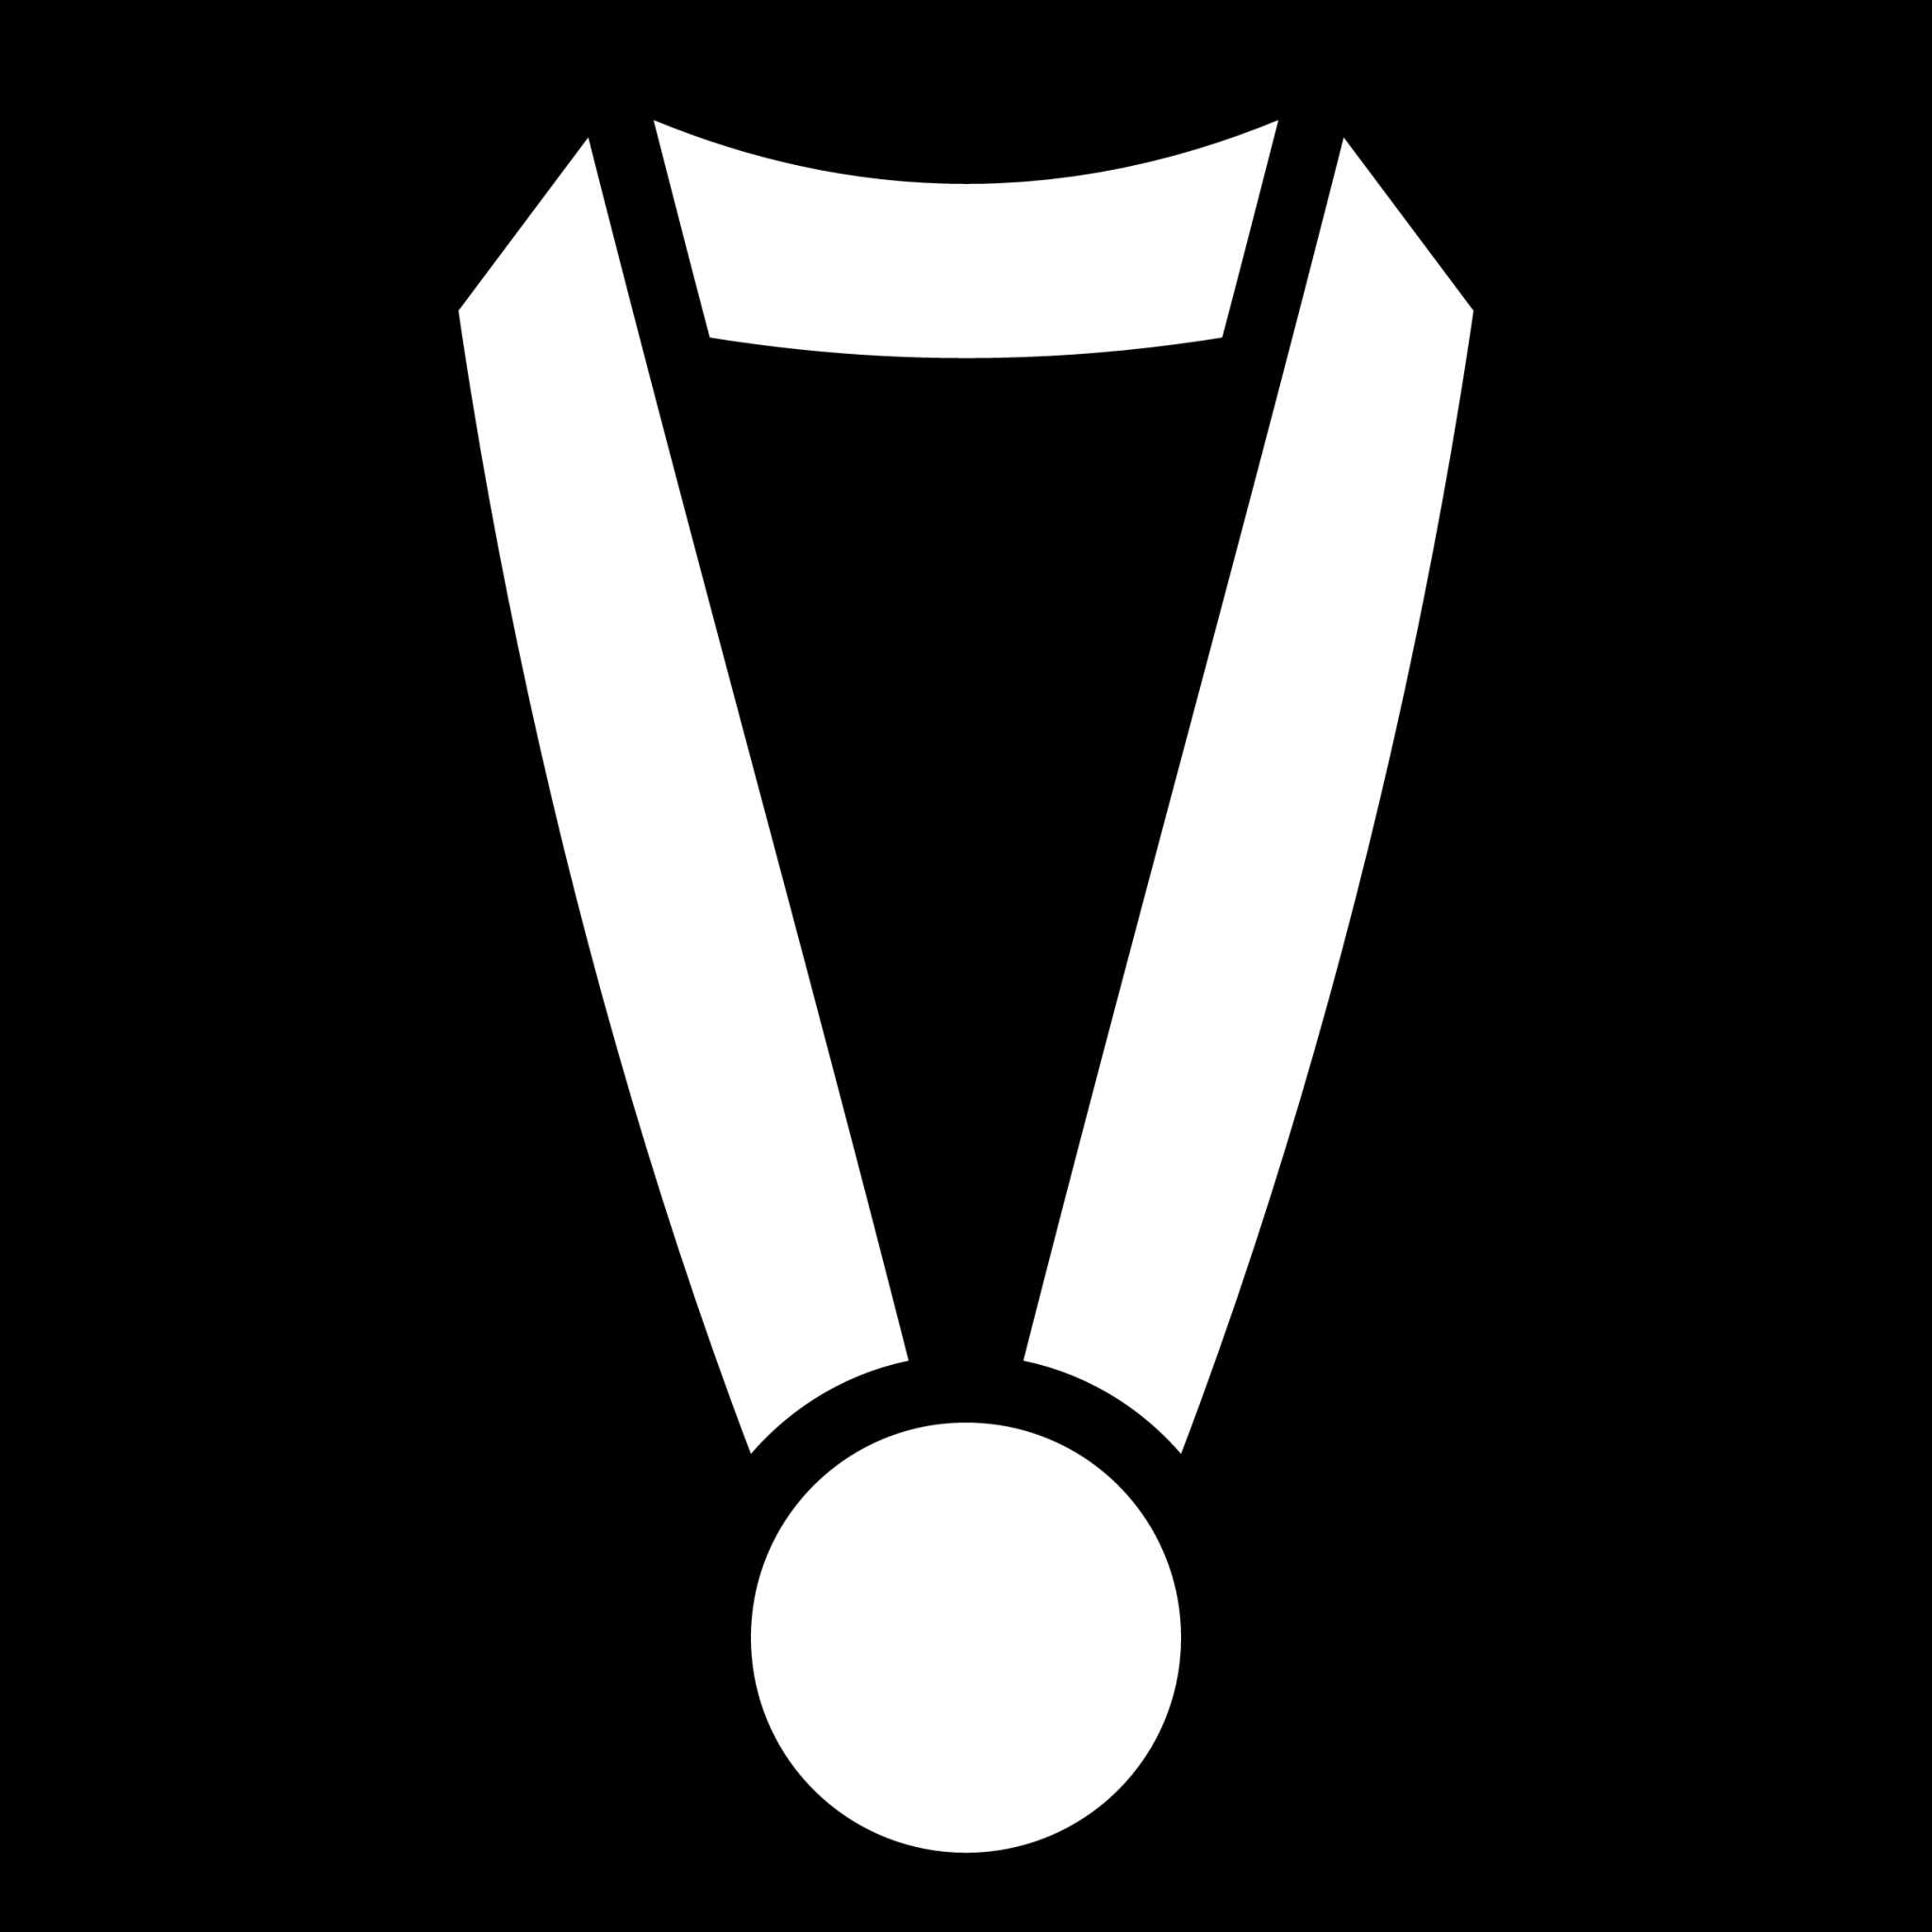 sport medal icon